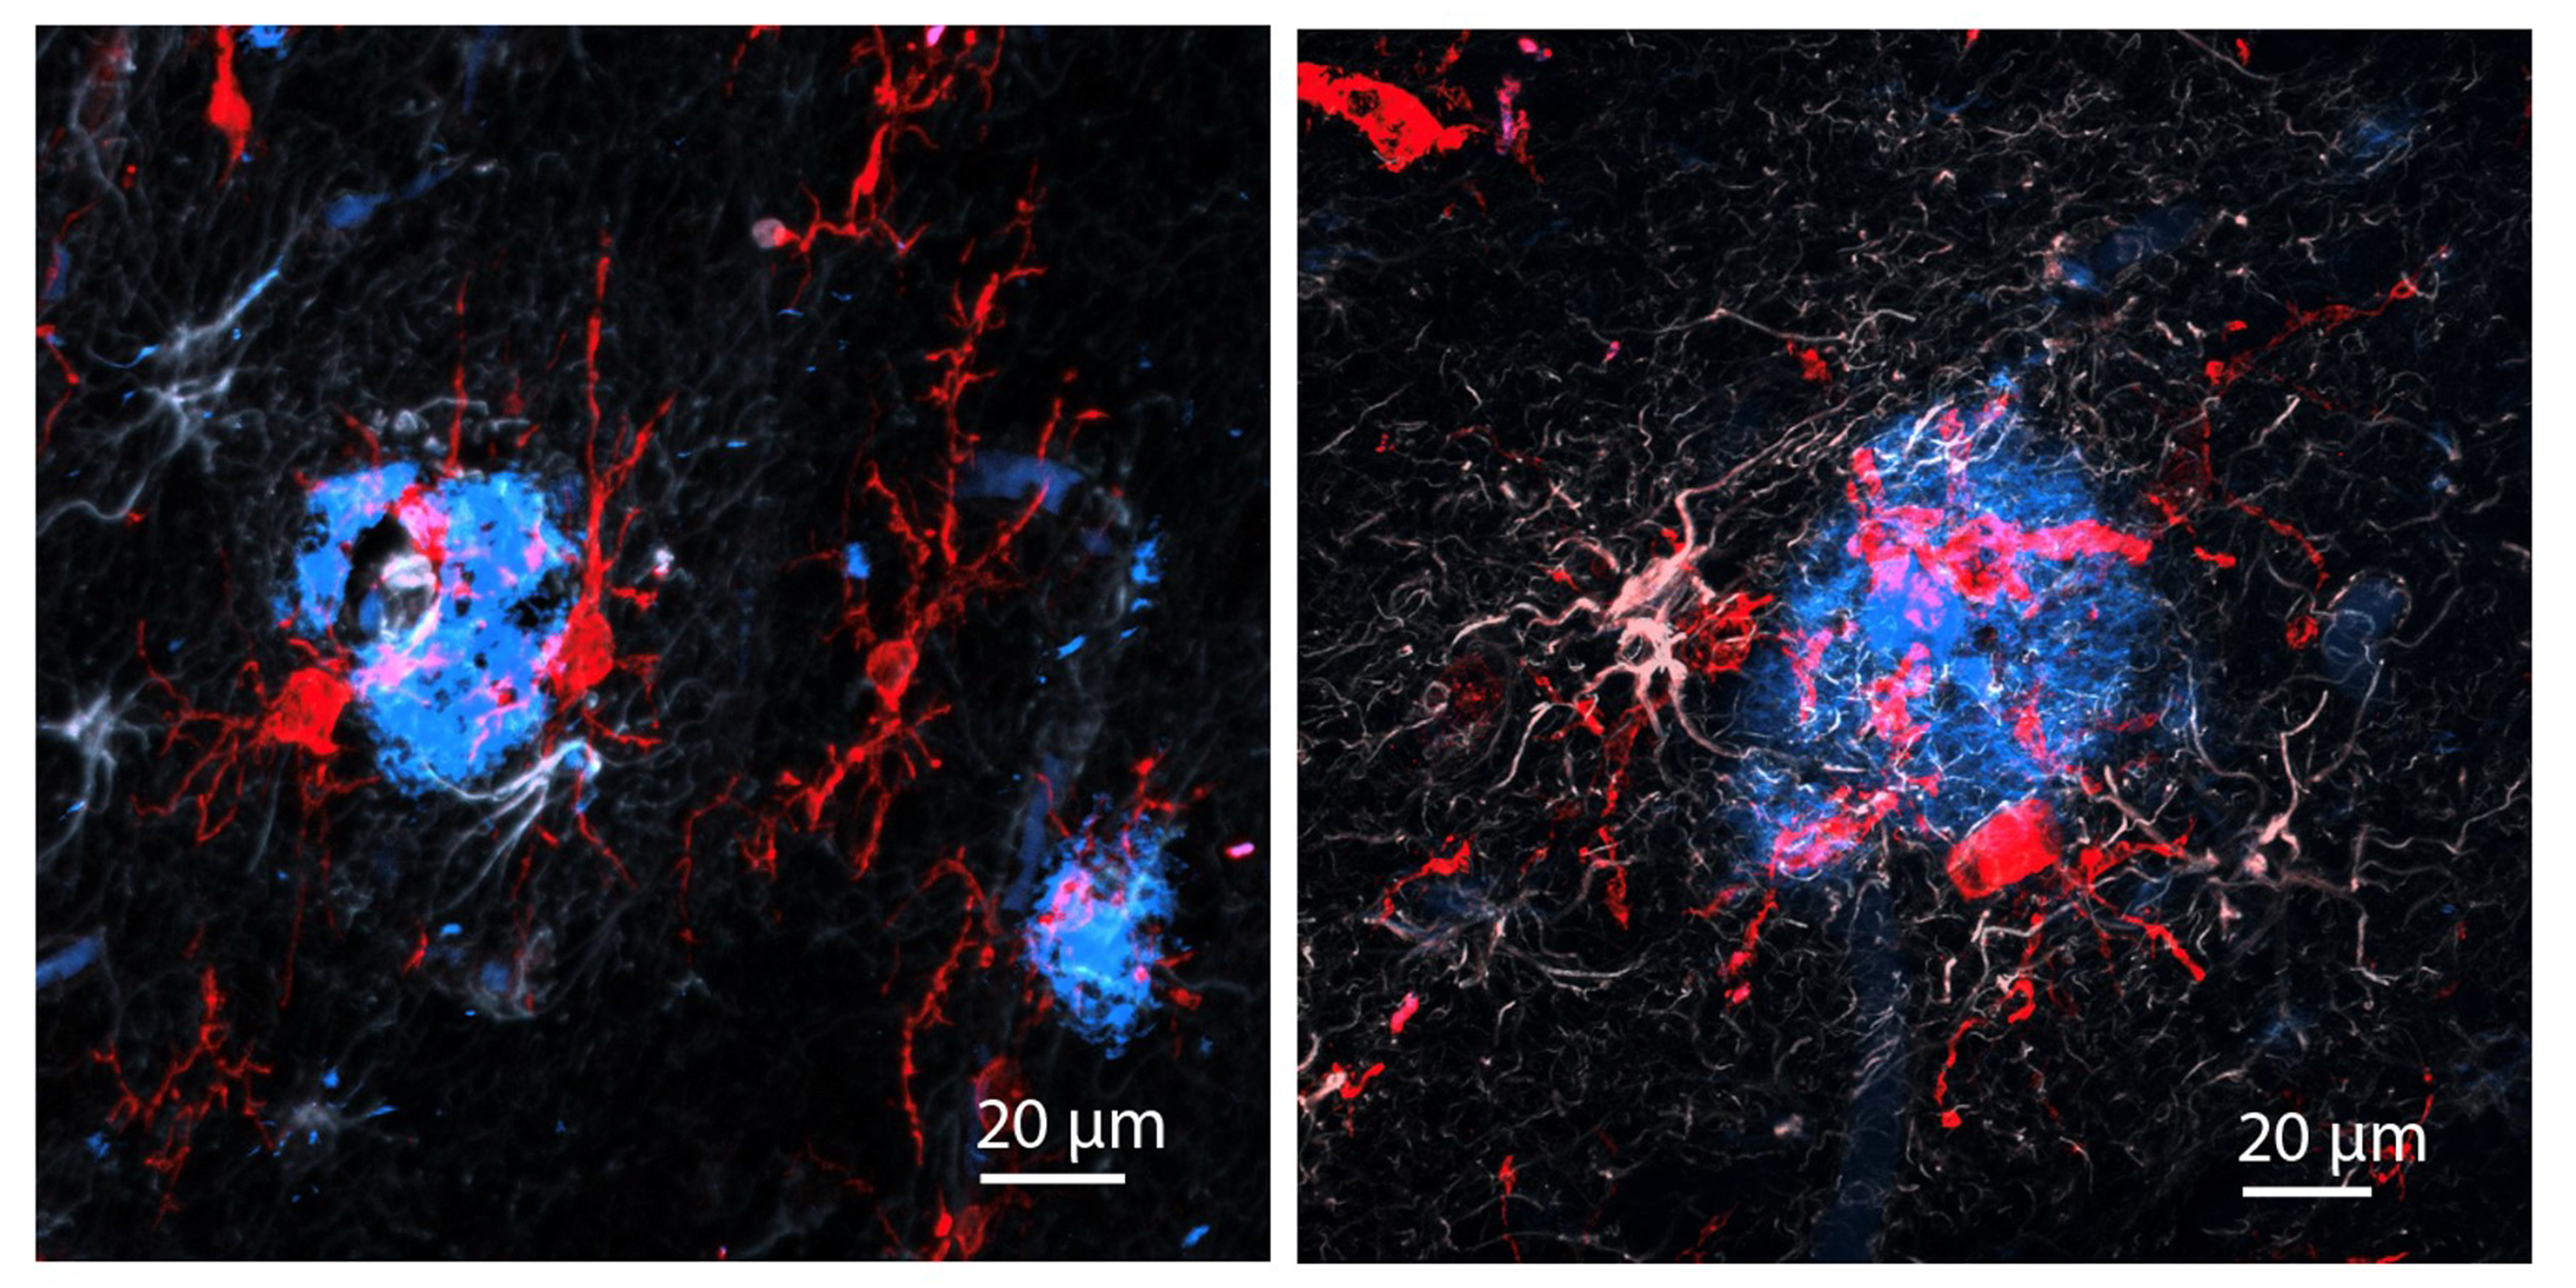 In two panels red microglia surround a bluish blob. In the left panel the microglia are more slender whereas they are more bloated on the right. The blue blub is more compact on the left and more diffuse on the right.